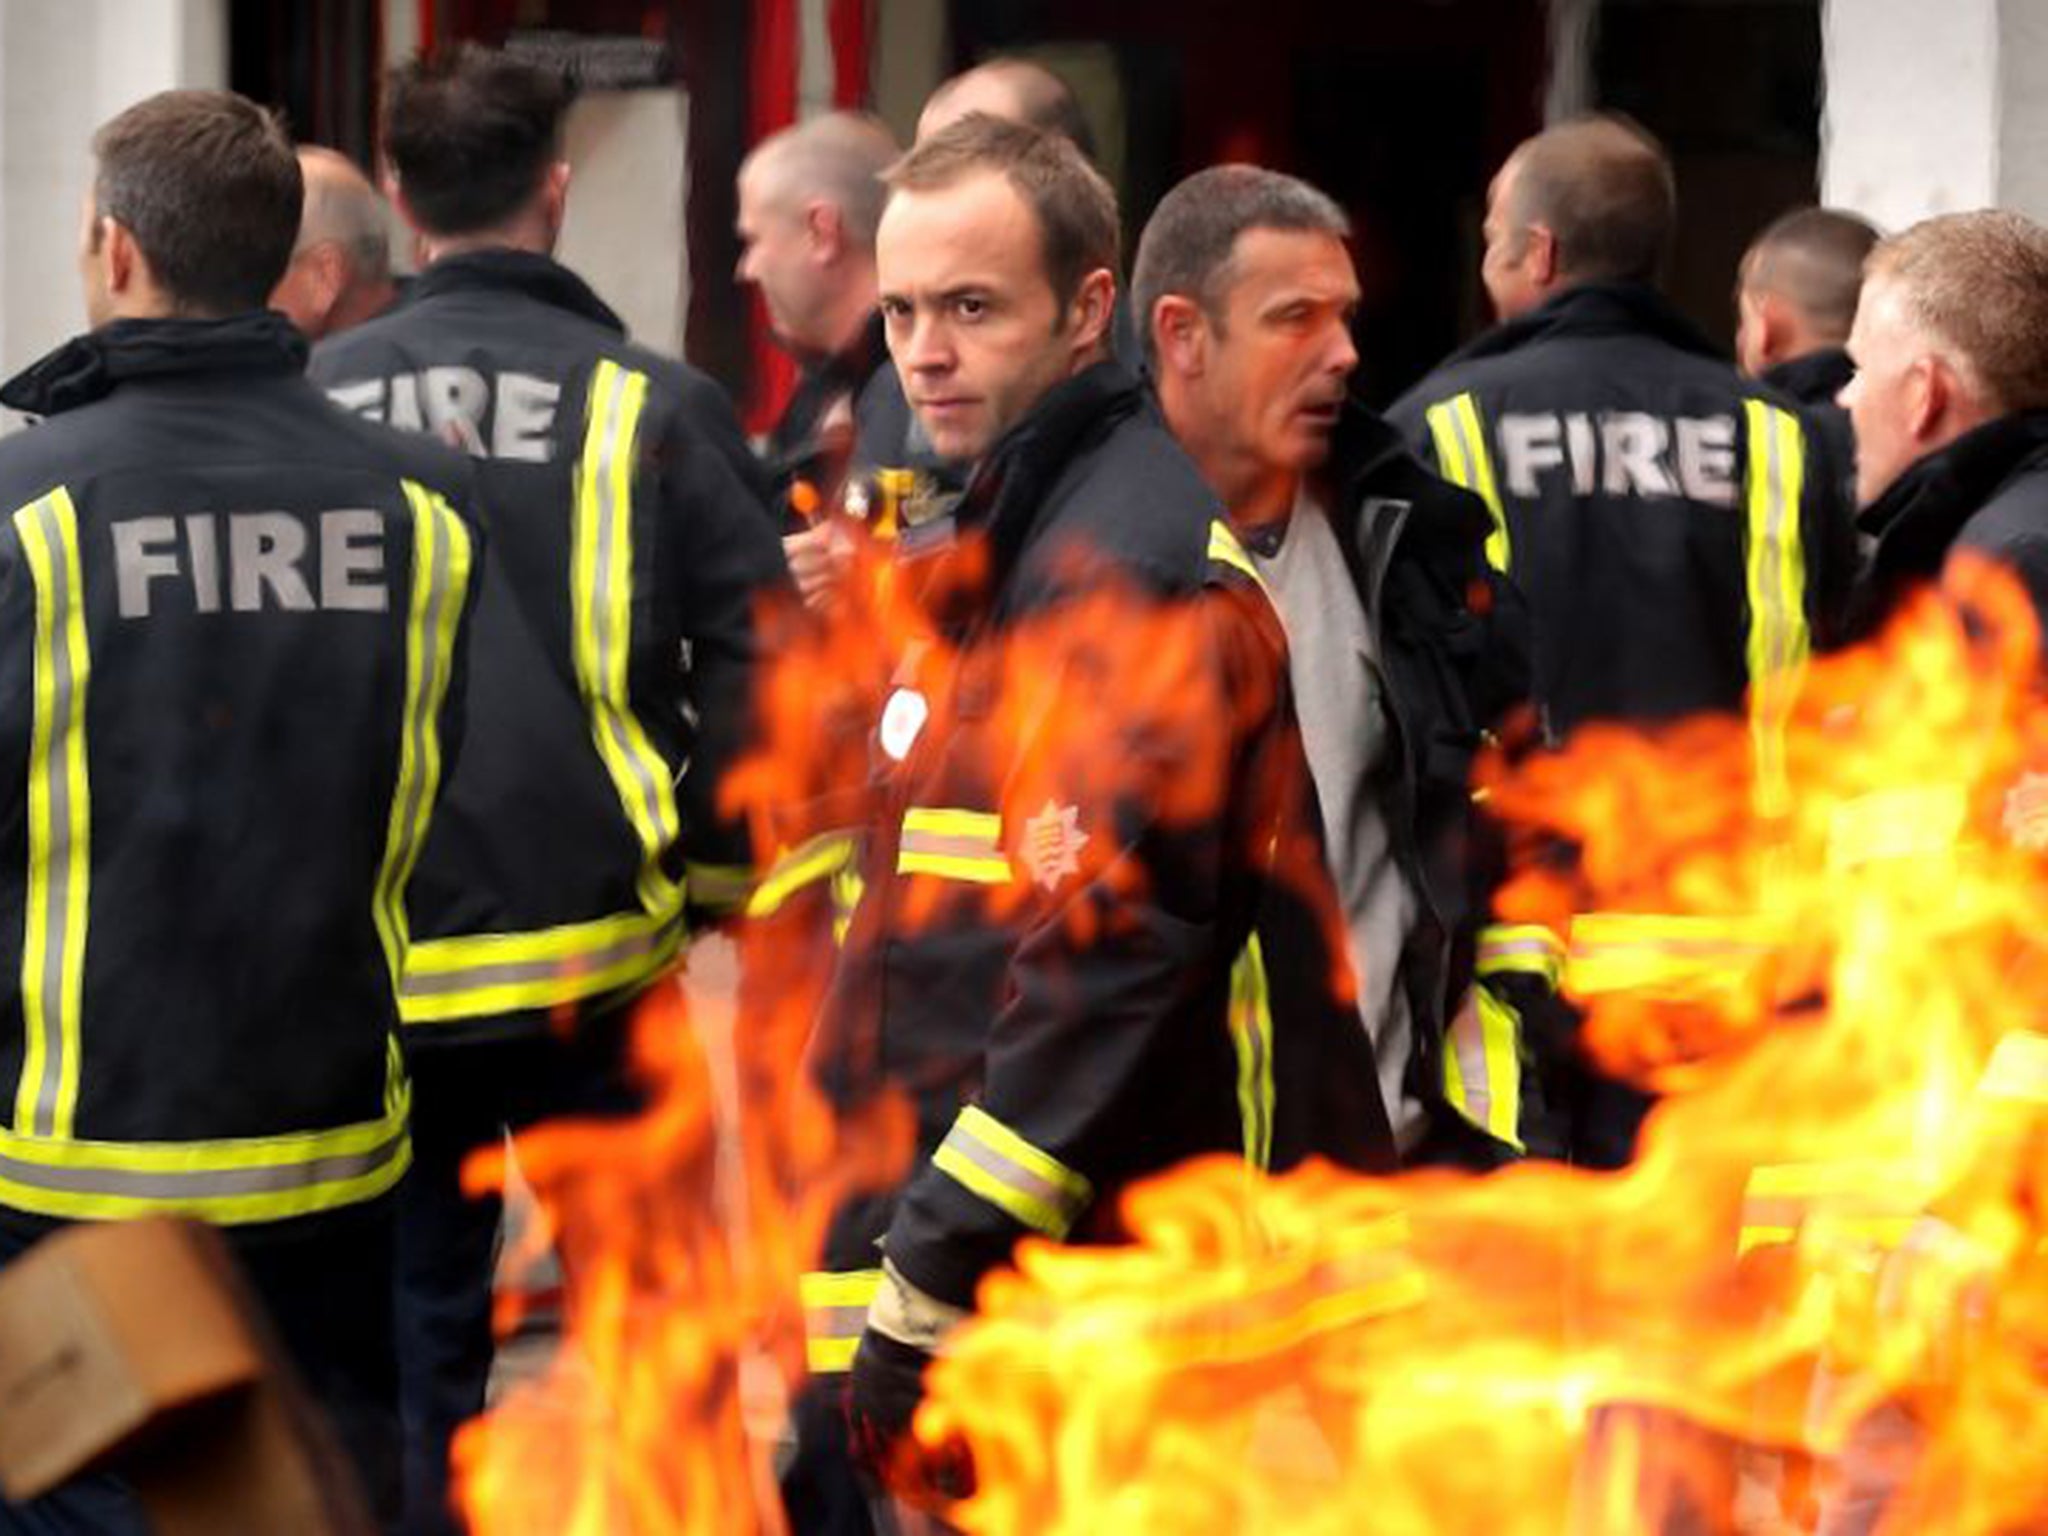 Firefighters have gone on strike over moves to cut their pensions